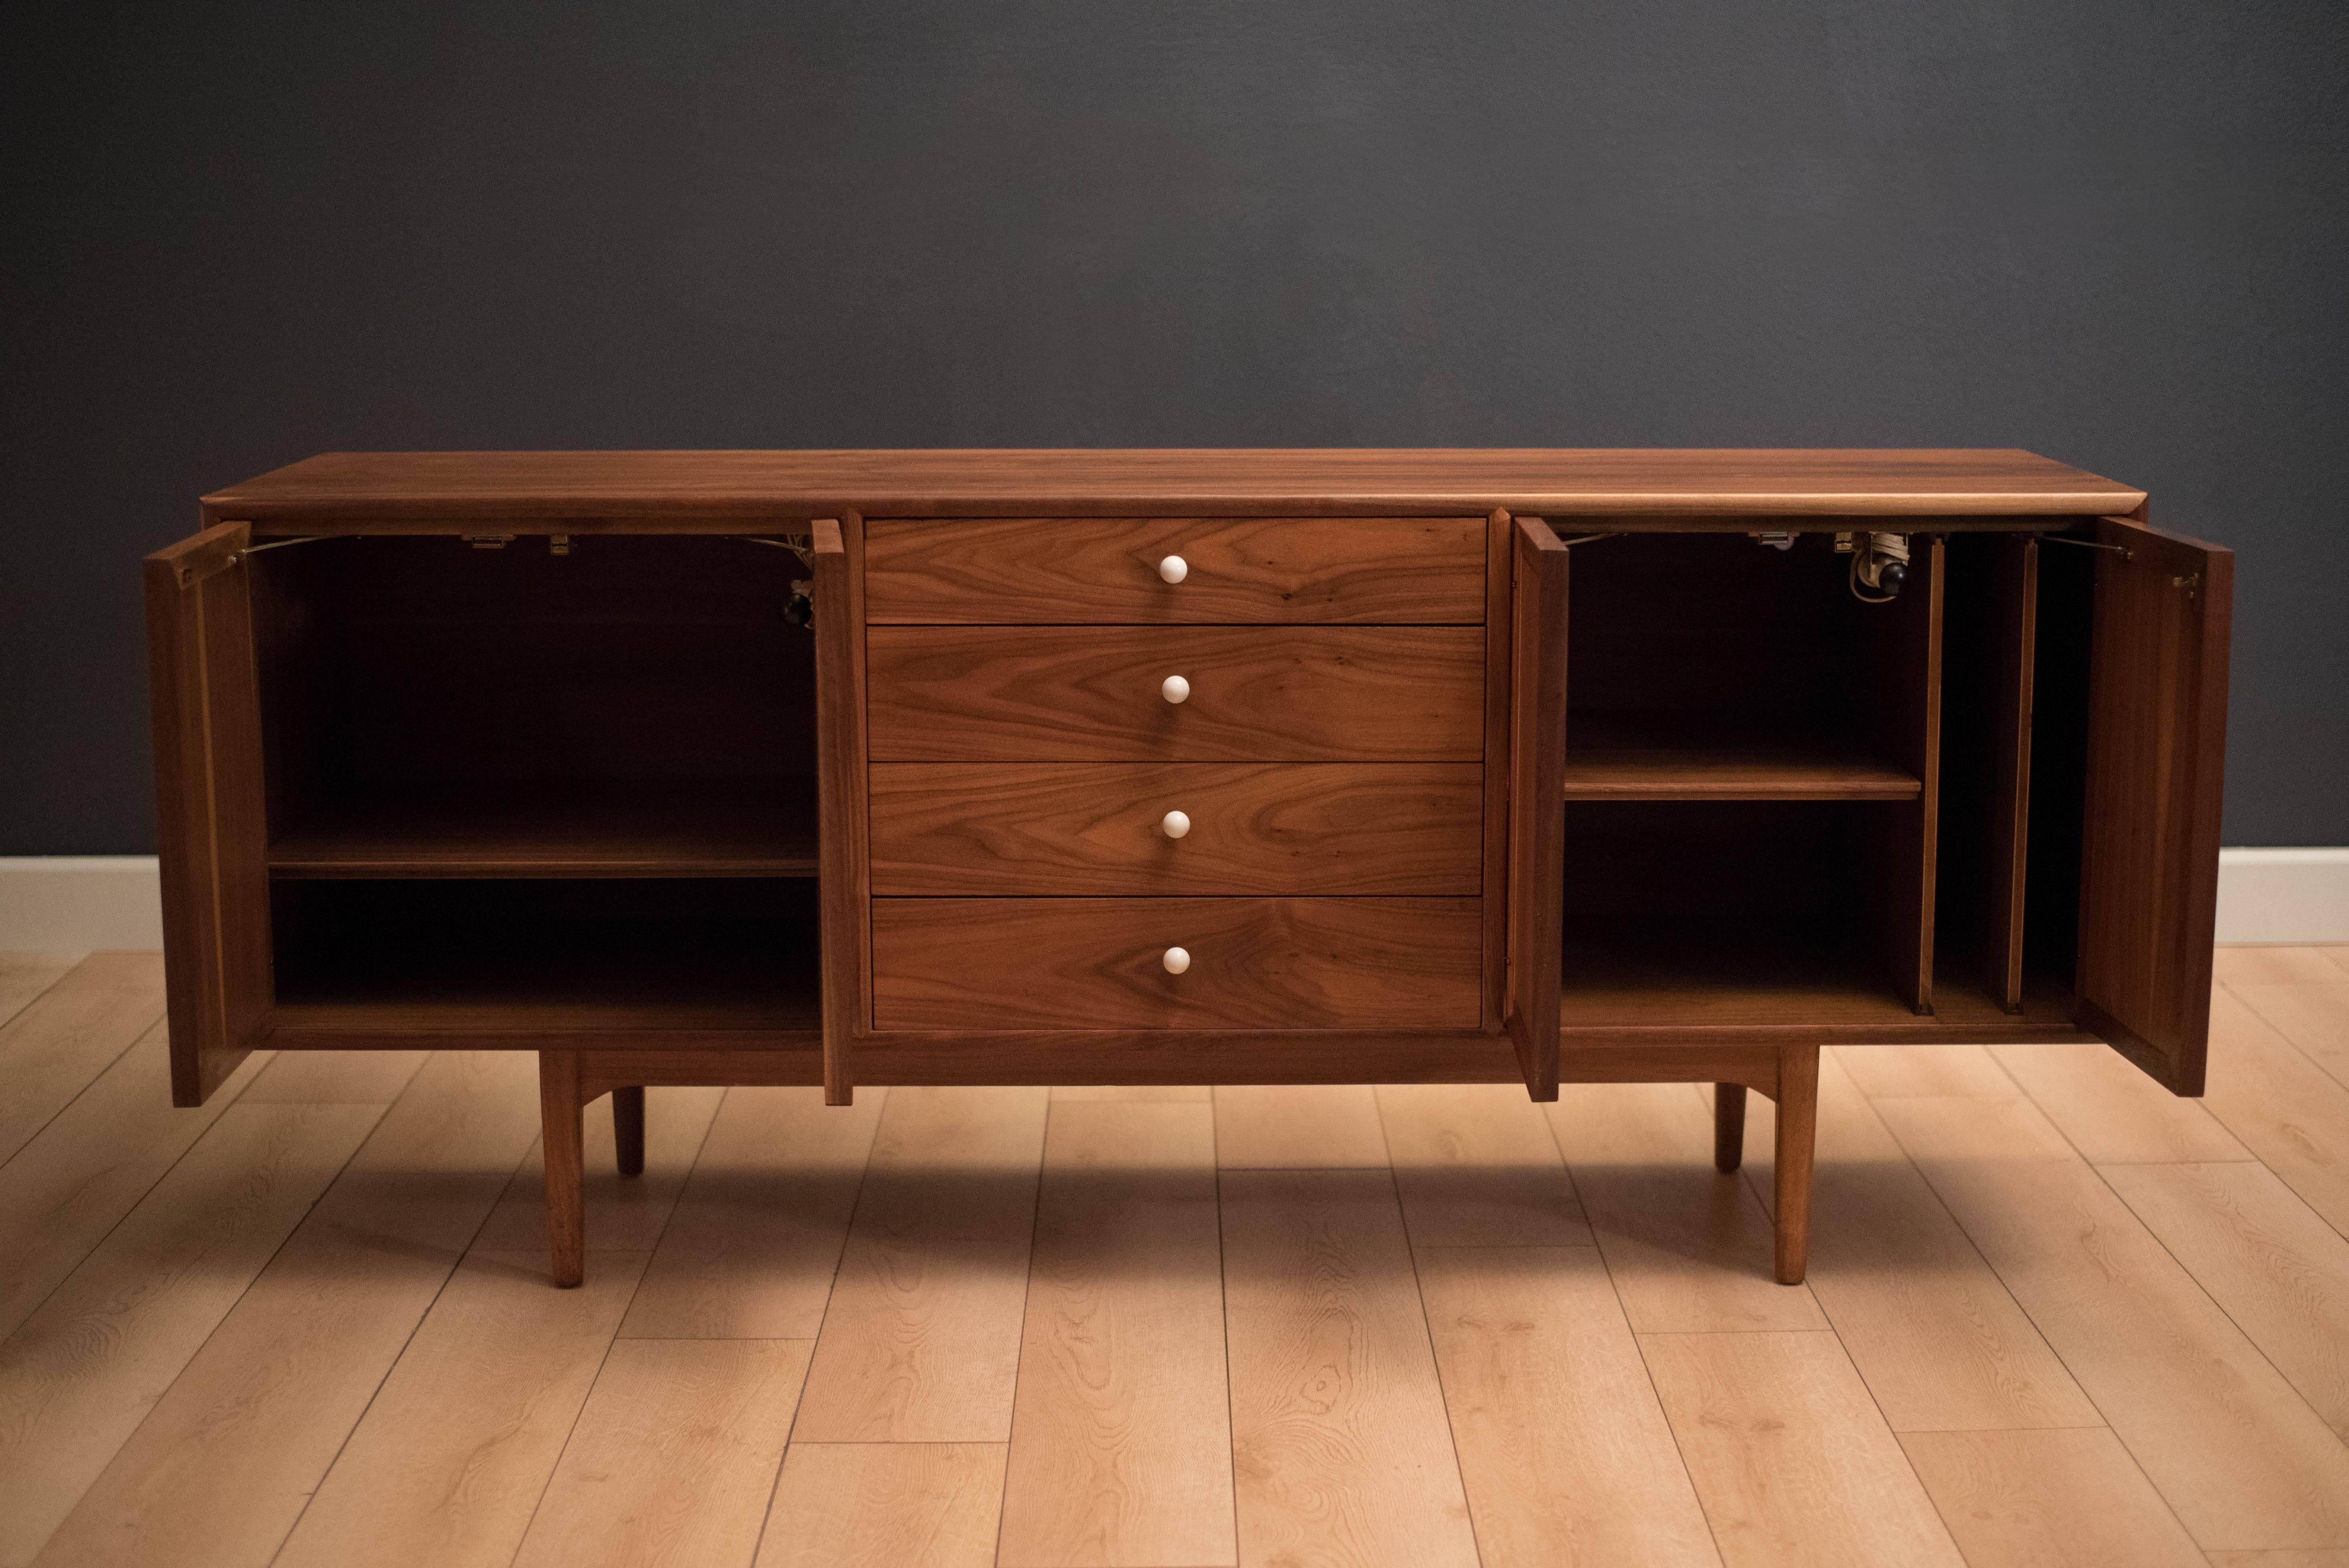 Mid century Drexel declaration sideboard credenza by Kipp Stewart and Stewart MacDougall. This piece features bookmatched black walnut grains highlighted by their signature white porcelain pulls. Equipped with four drawers and open storage with